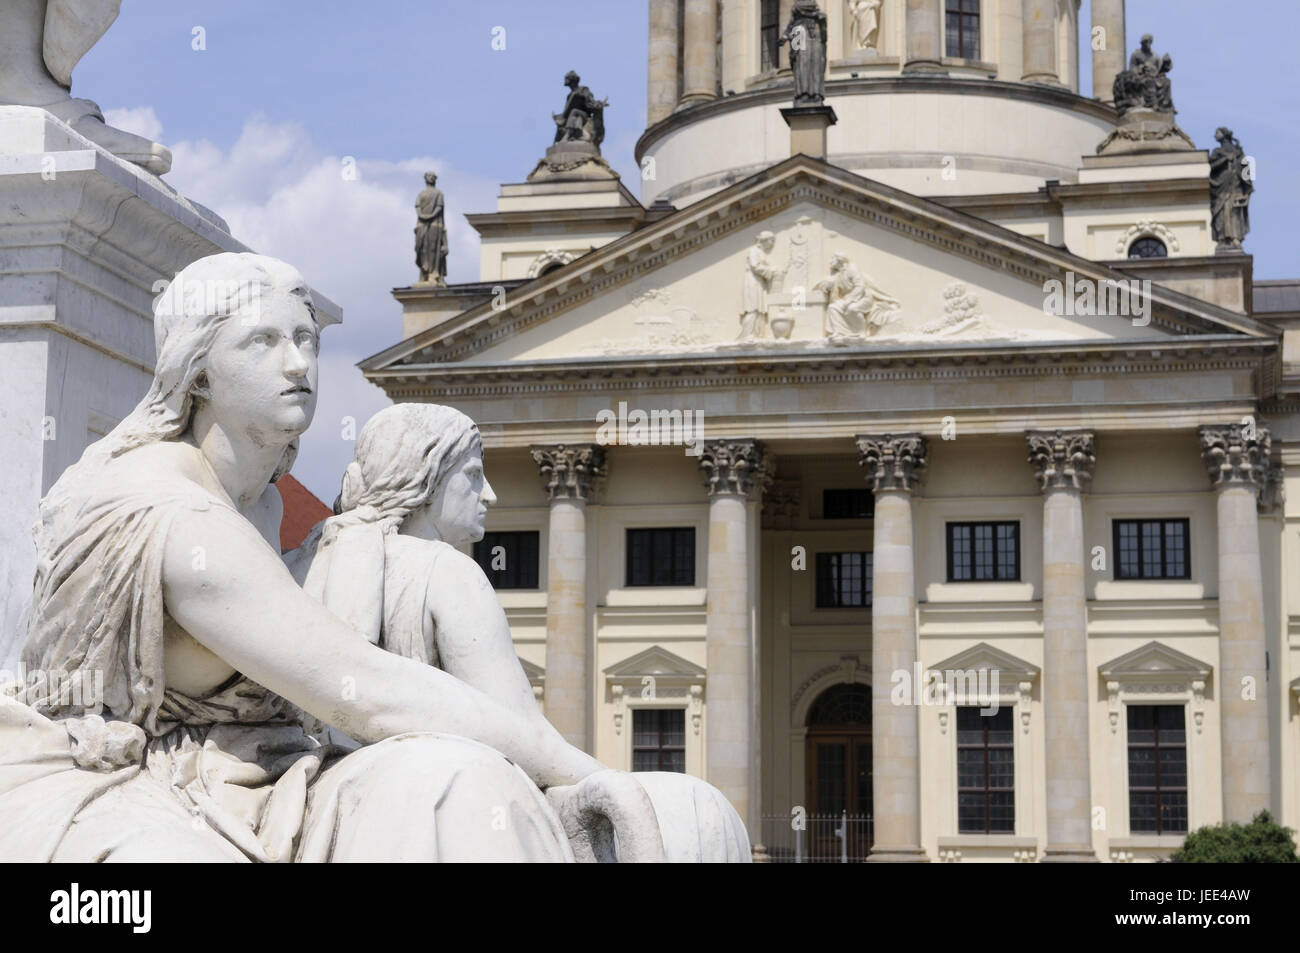 Statues, French cathedral, gendarme's market, Berlin, Germany, Stock Photo